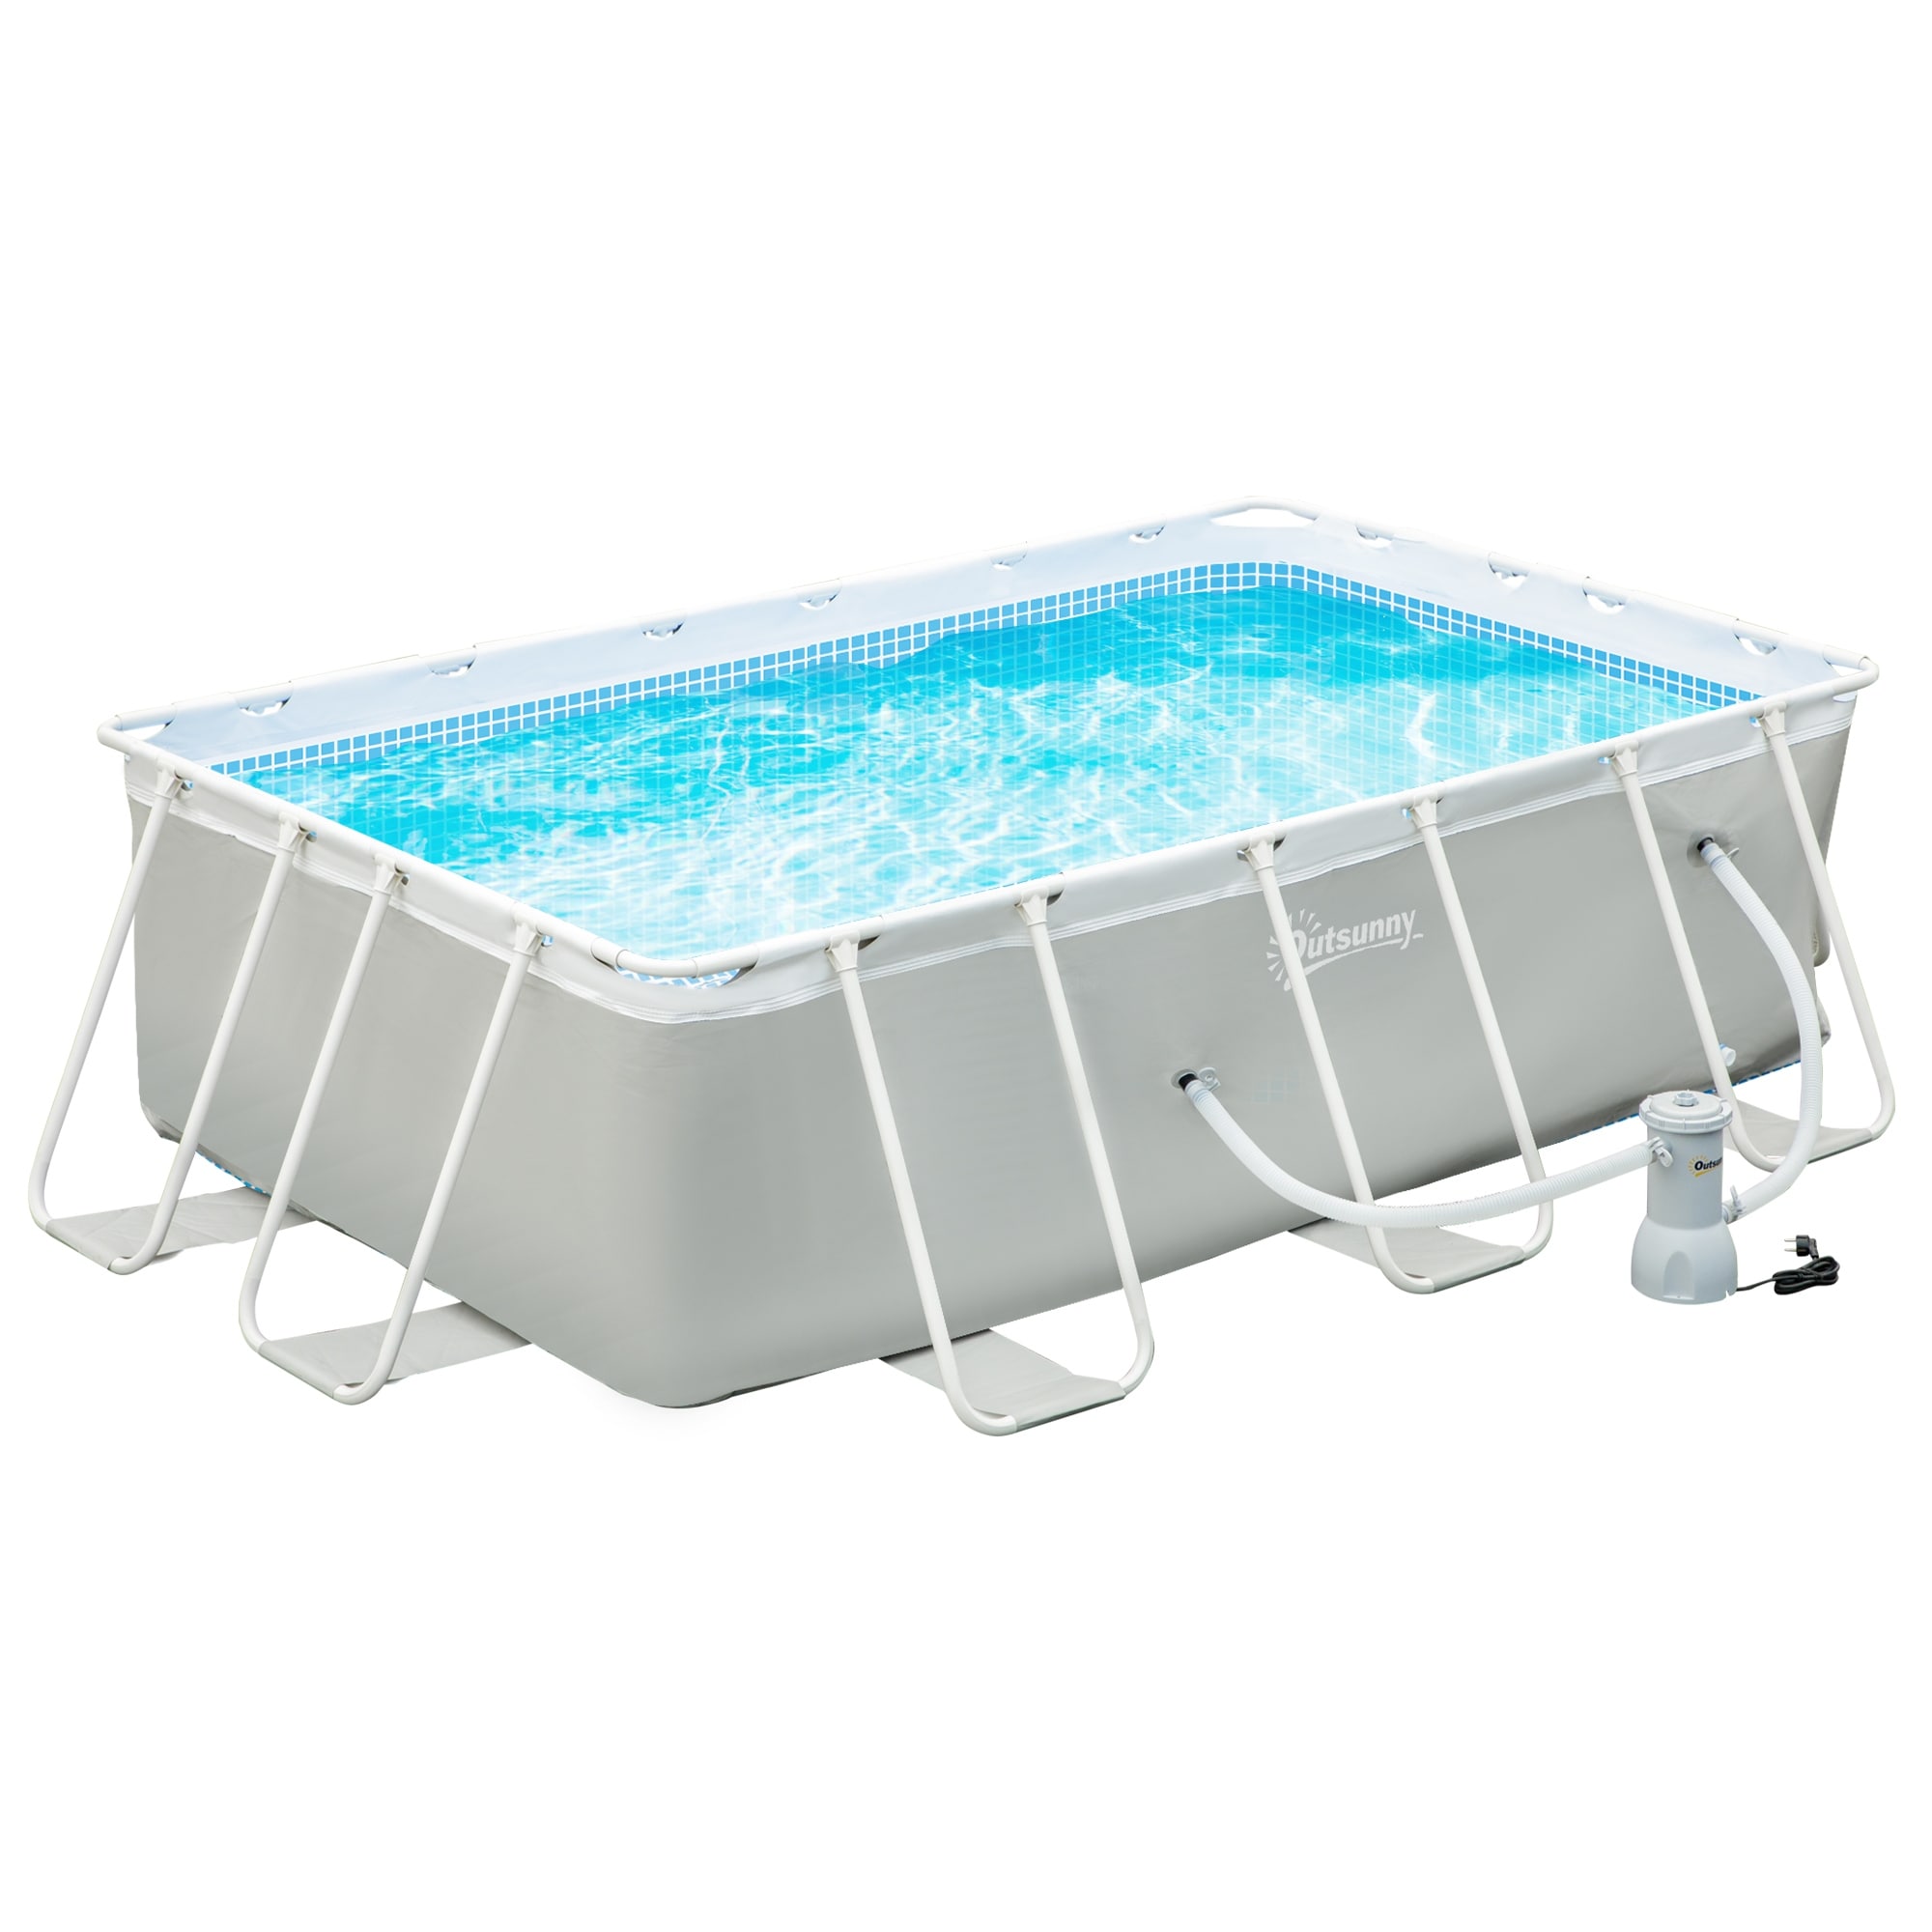 Outsunny 11ft x 7ft x 32in Steel Frame Pool with Filter Pump